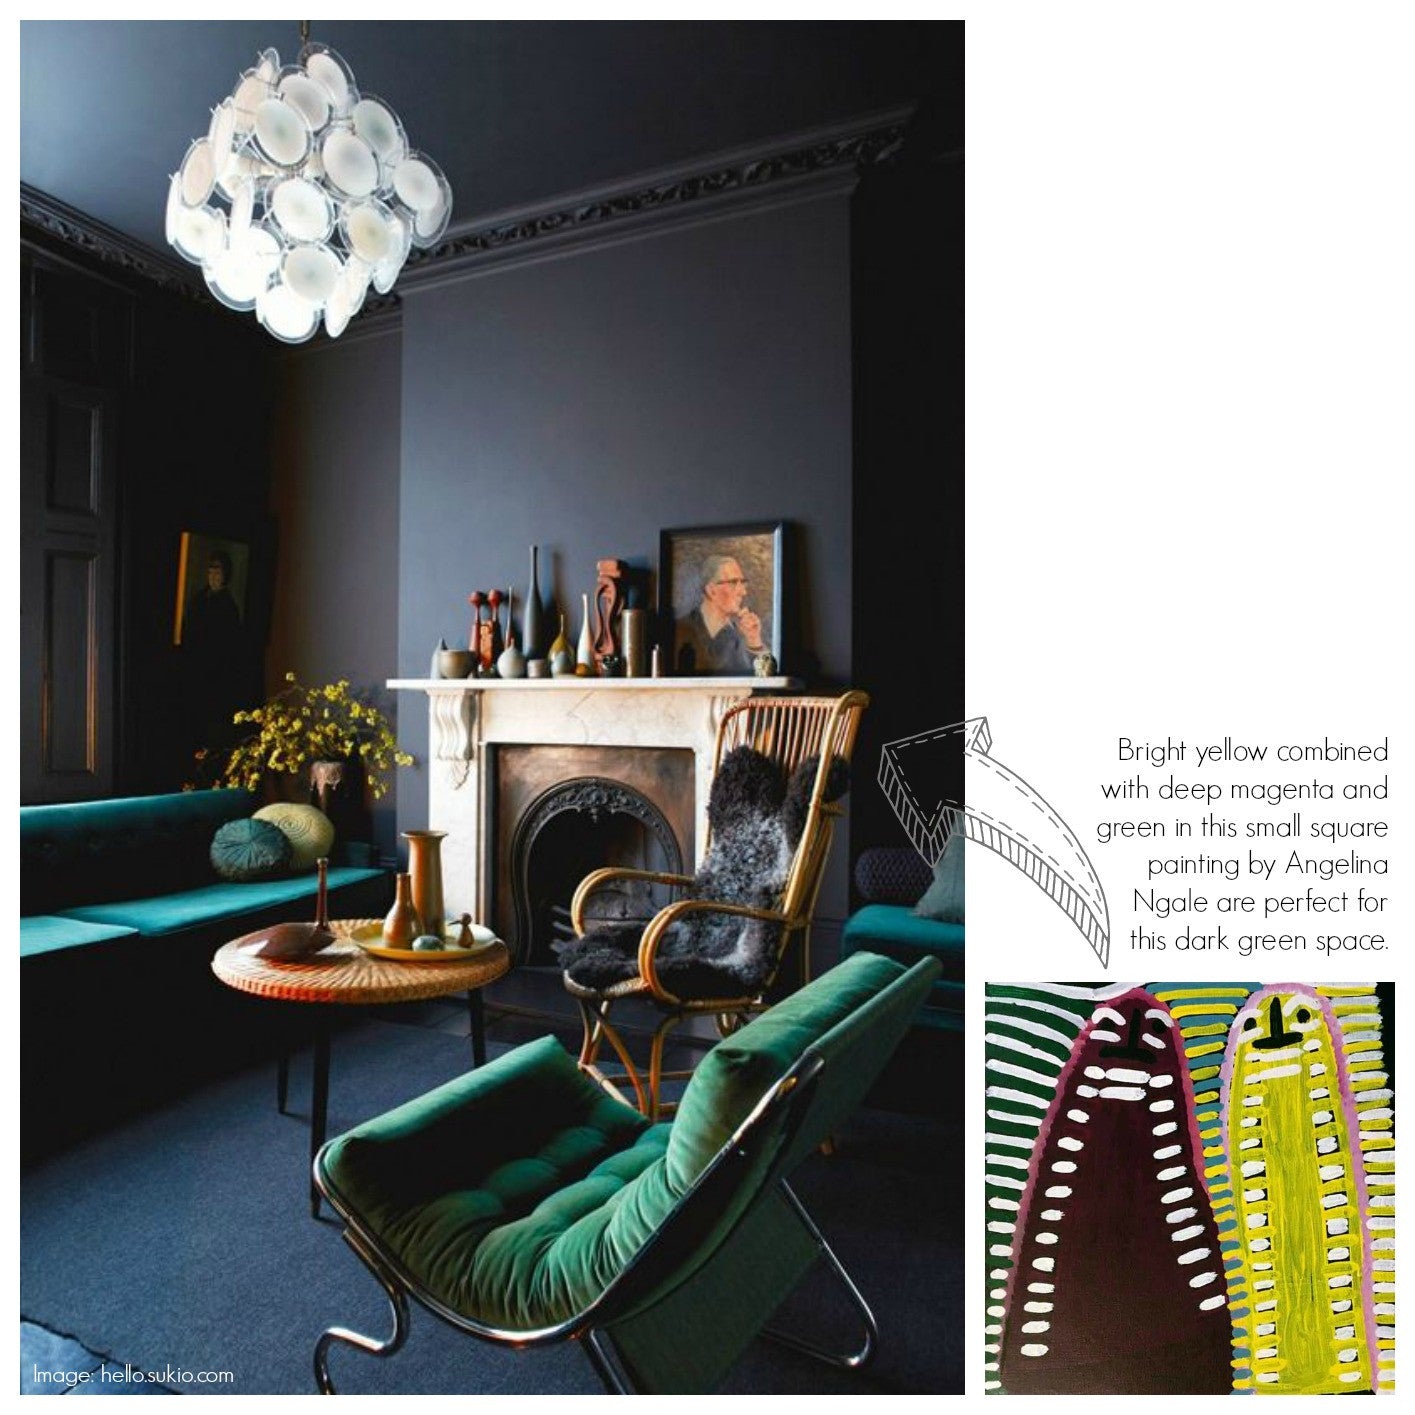 Decorating with Green - Dark and Moody interiors